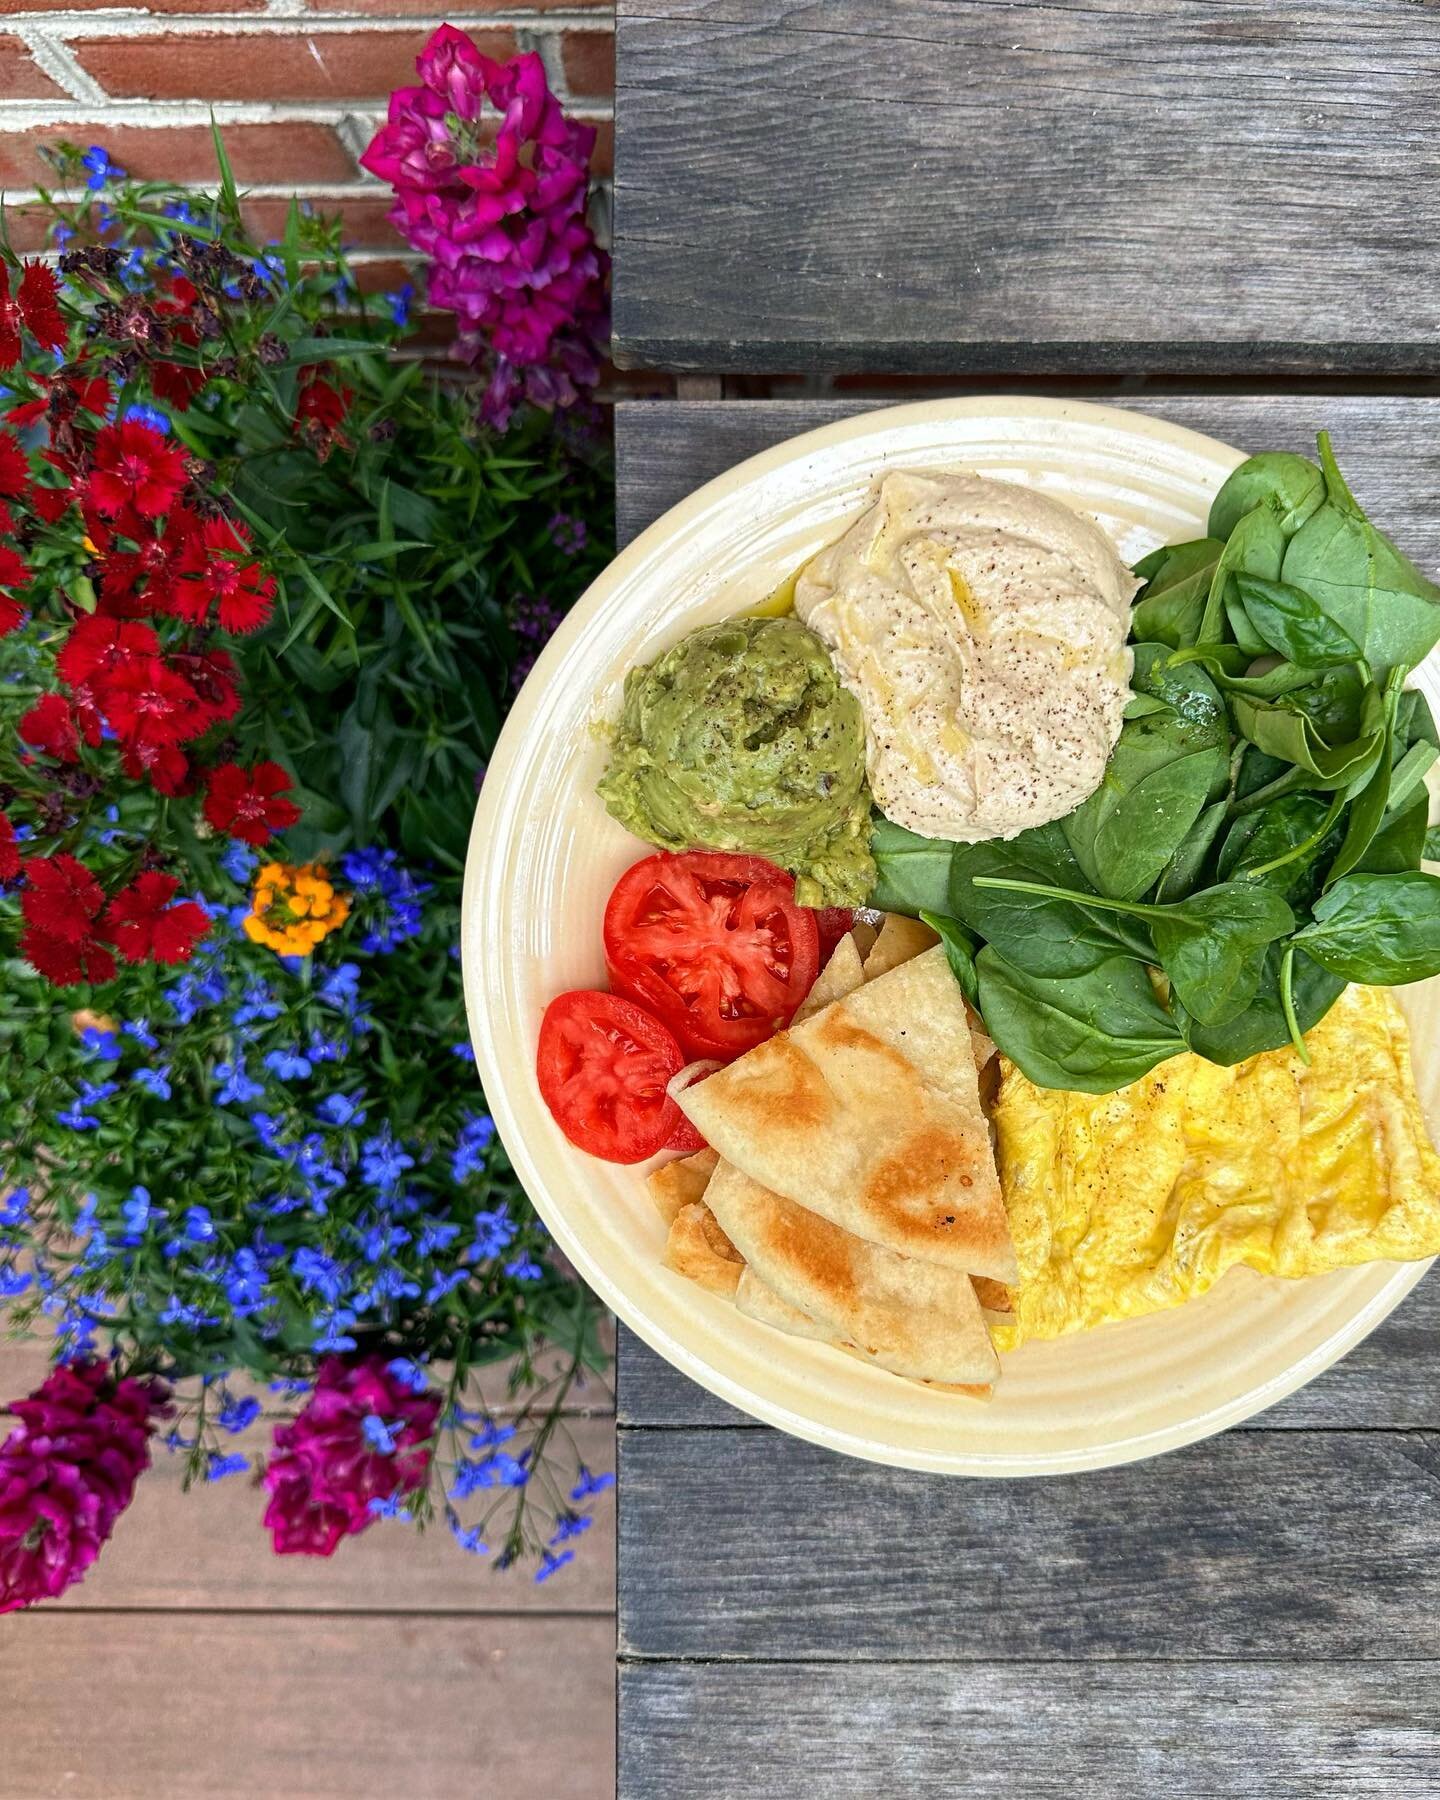 The Mediterranean | scrambled egg, hummus, za&rsquo;atar, baby spinach, naan, tomato &amp; avocado. 

Brunch is available all day, everyday at Greenville!

#hummus #hummusplate #scrambledeggs #brunch #brunchallday #mediterranean #mediterraneanstyle #